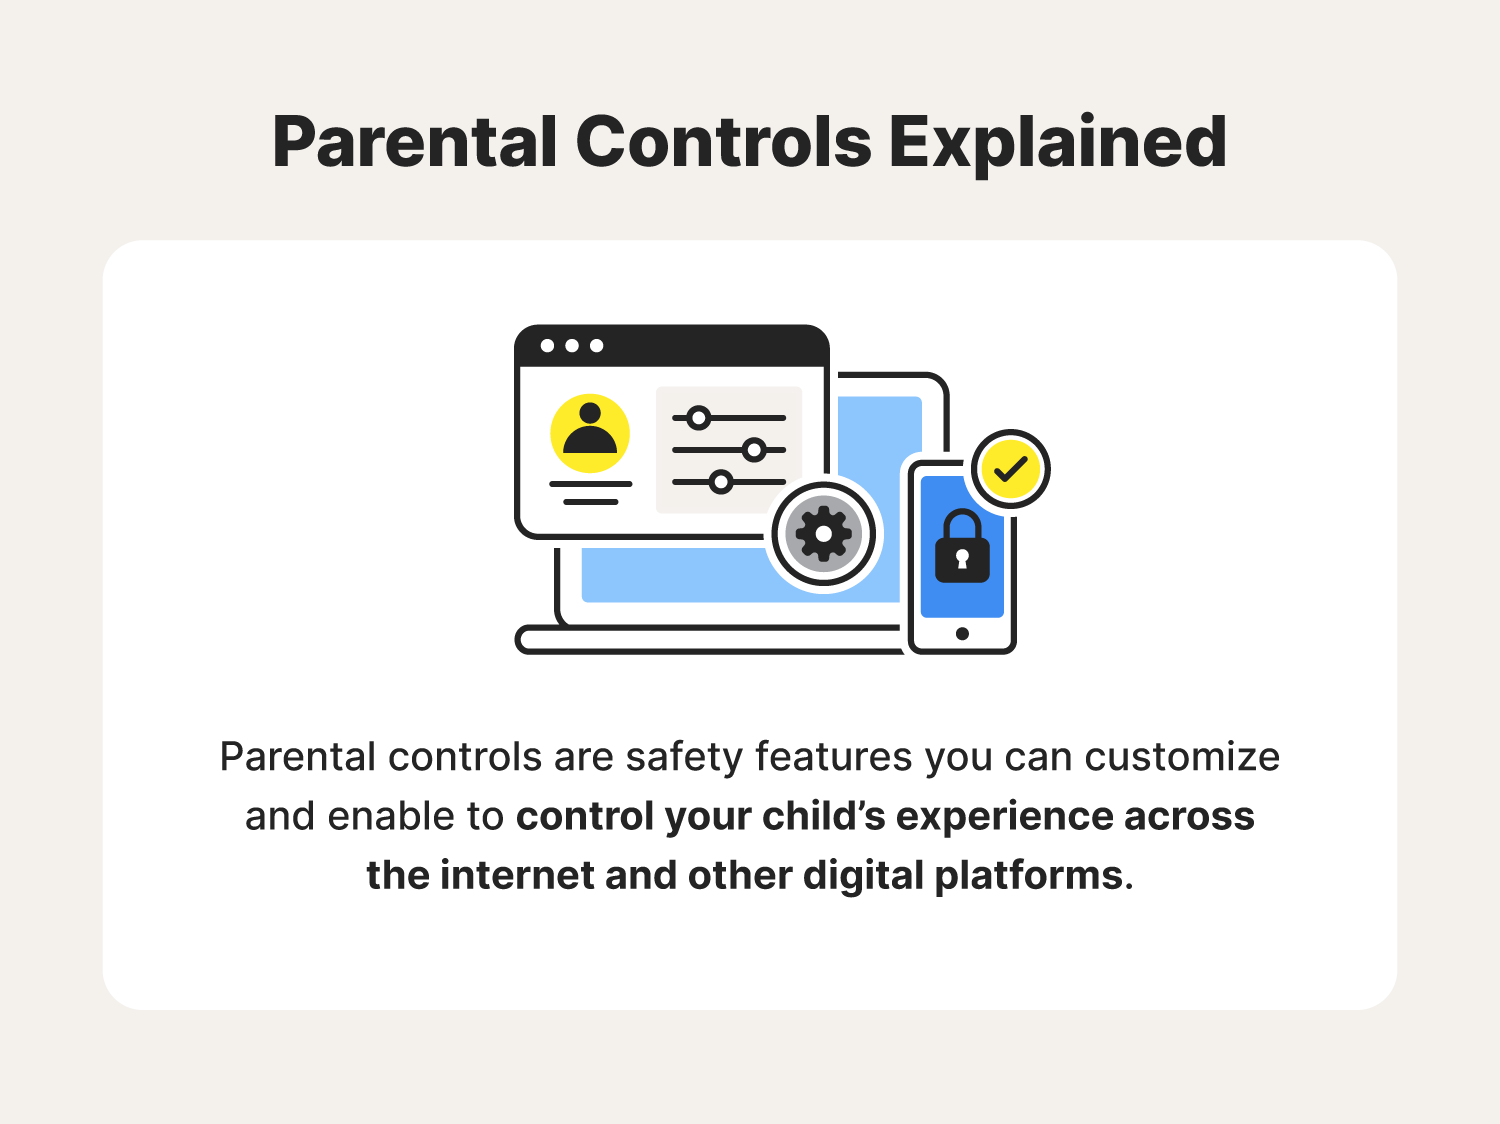 A graphic defines parental controls, further explaining the safety benefits of learning how to set parental controls